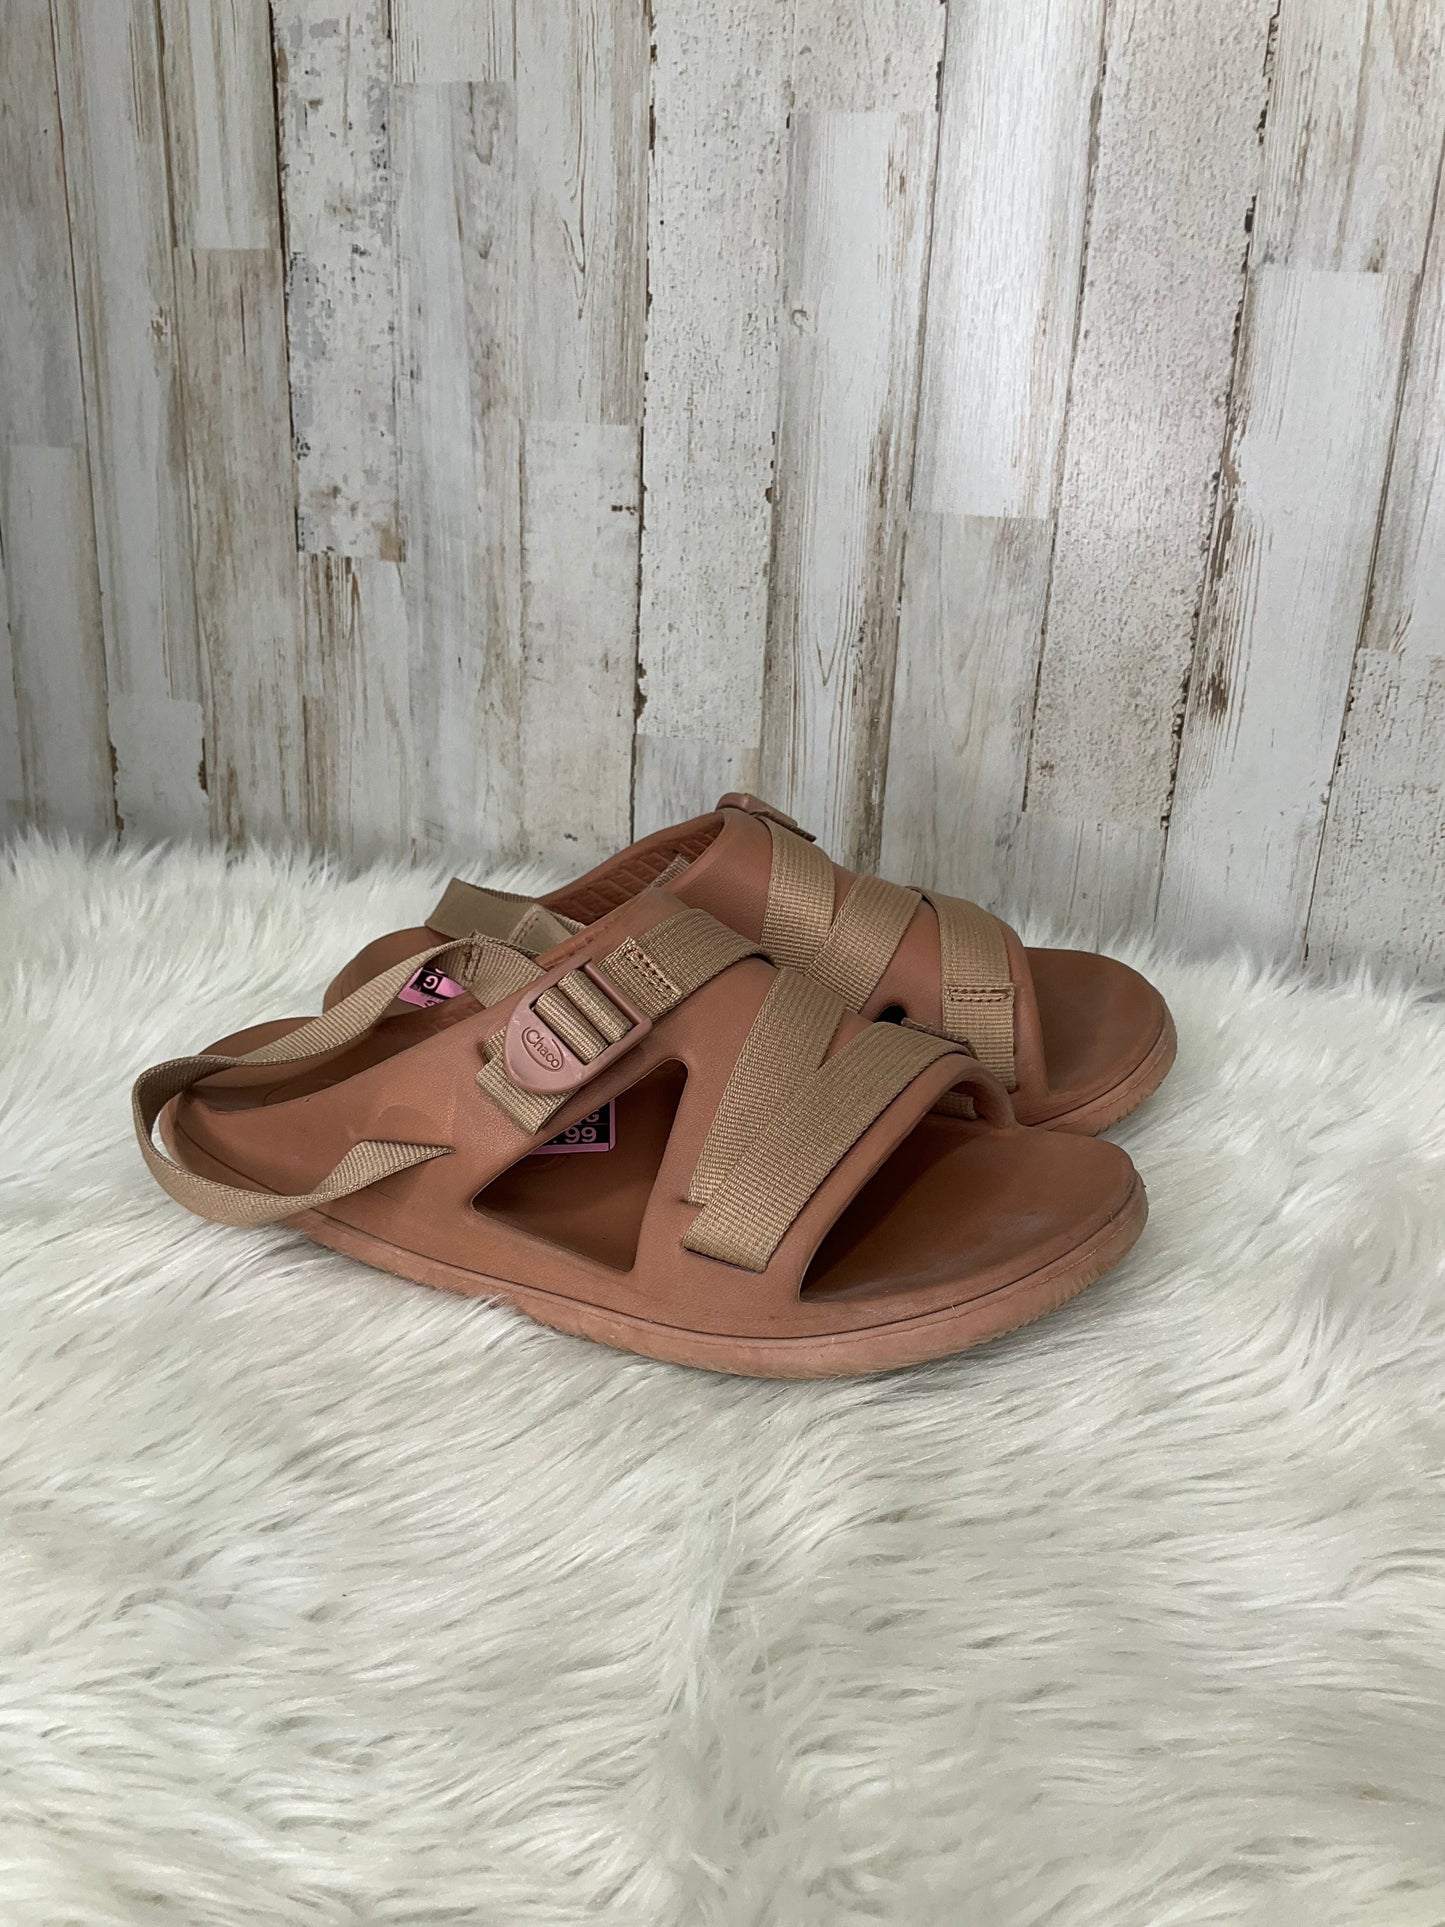 Beige Sandals Flats Chacos, Size 8